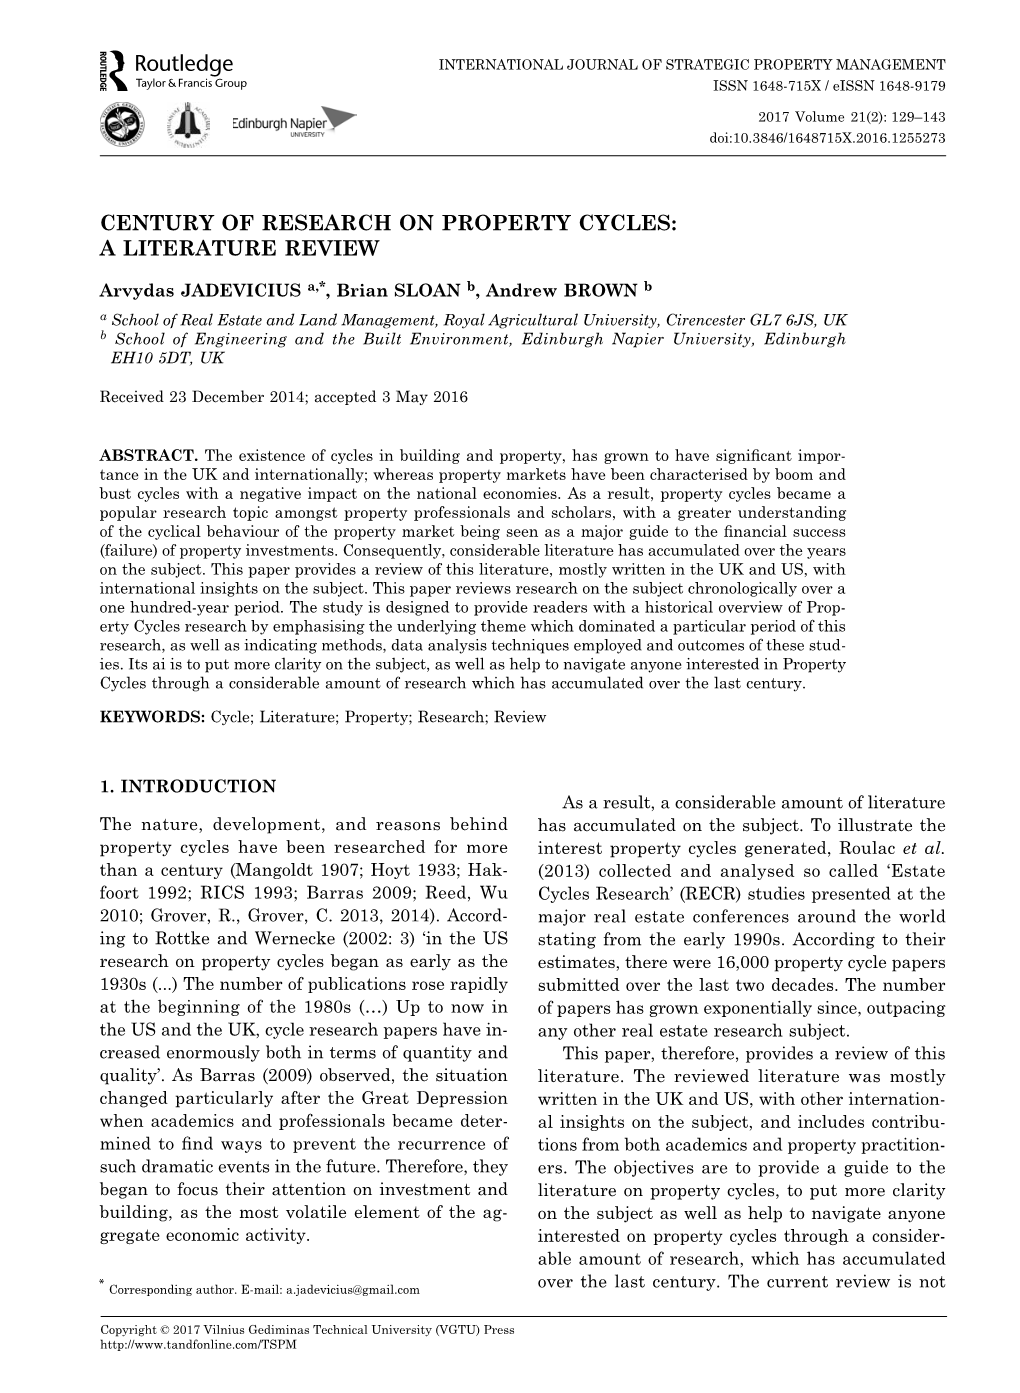 Century of Research on Property Cycles: a Literature Review